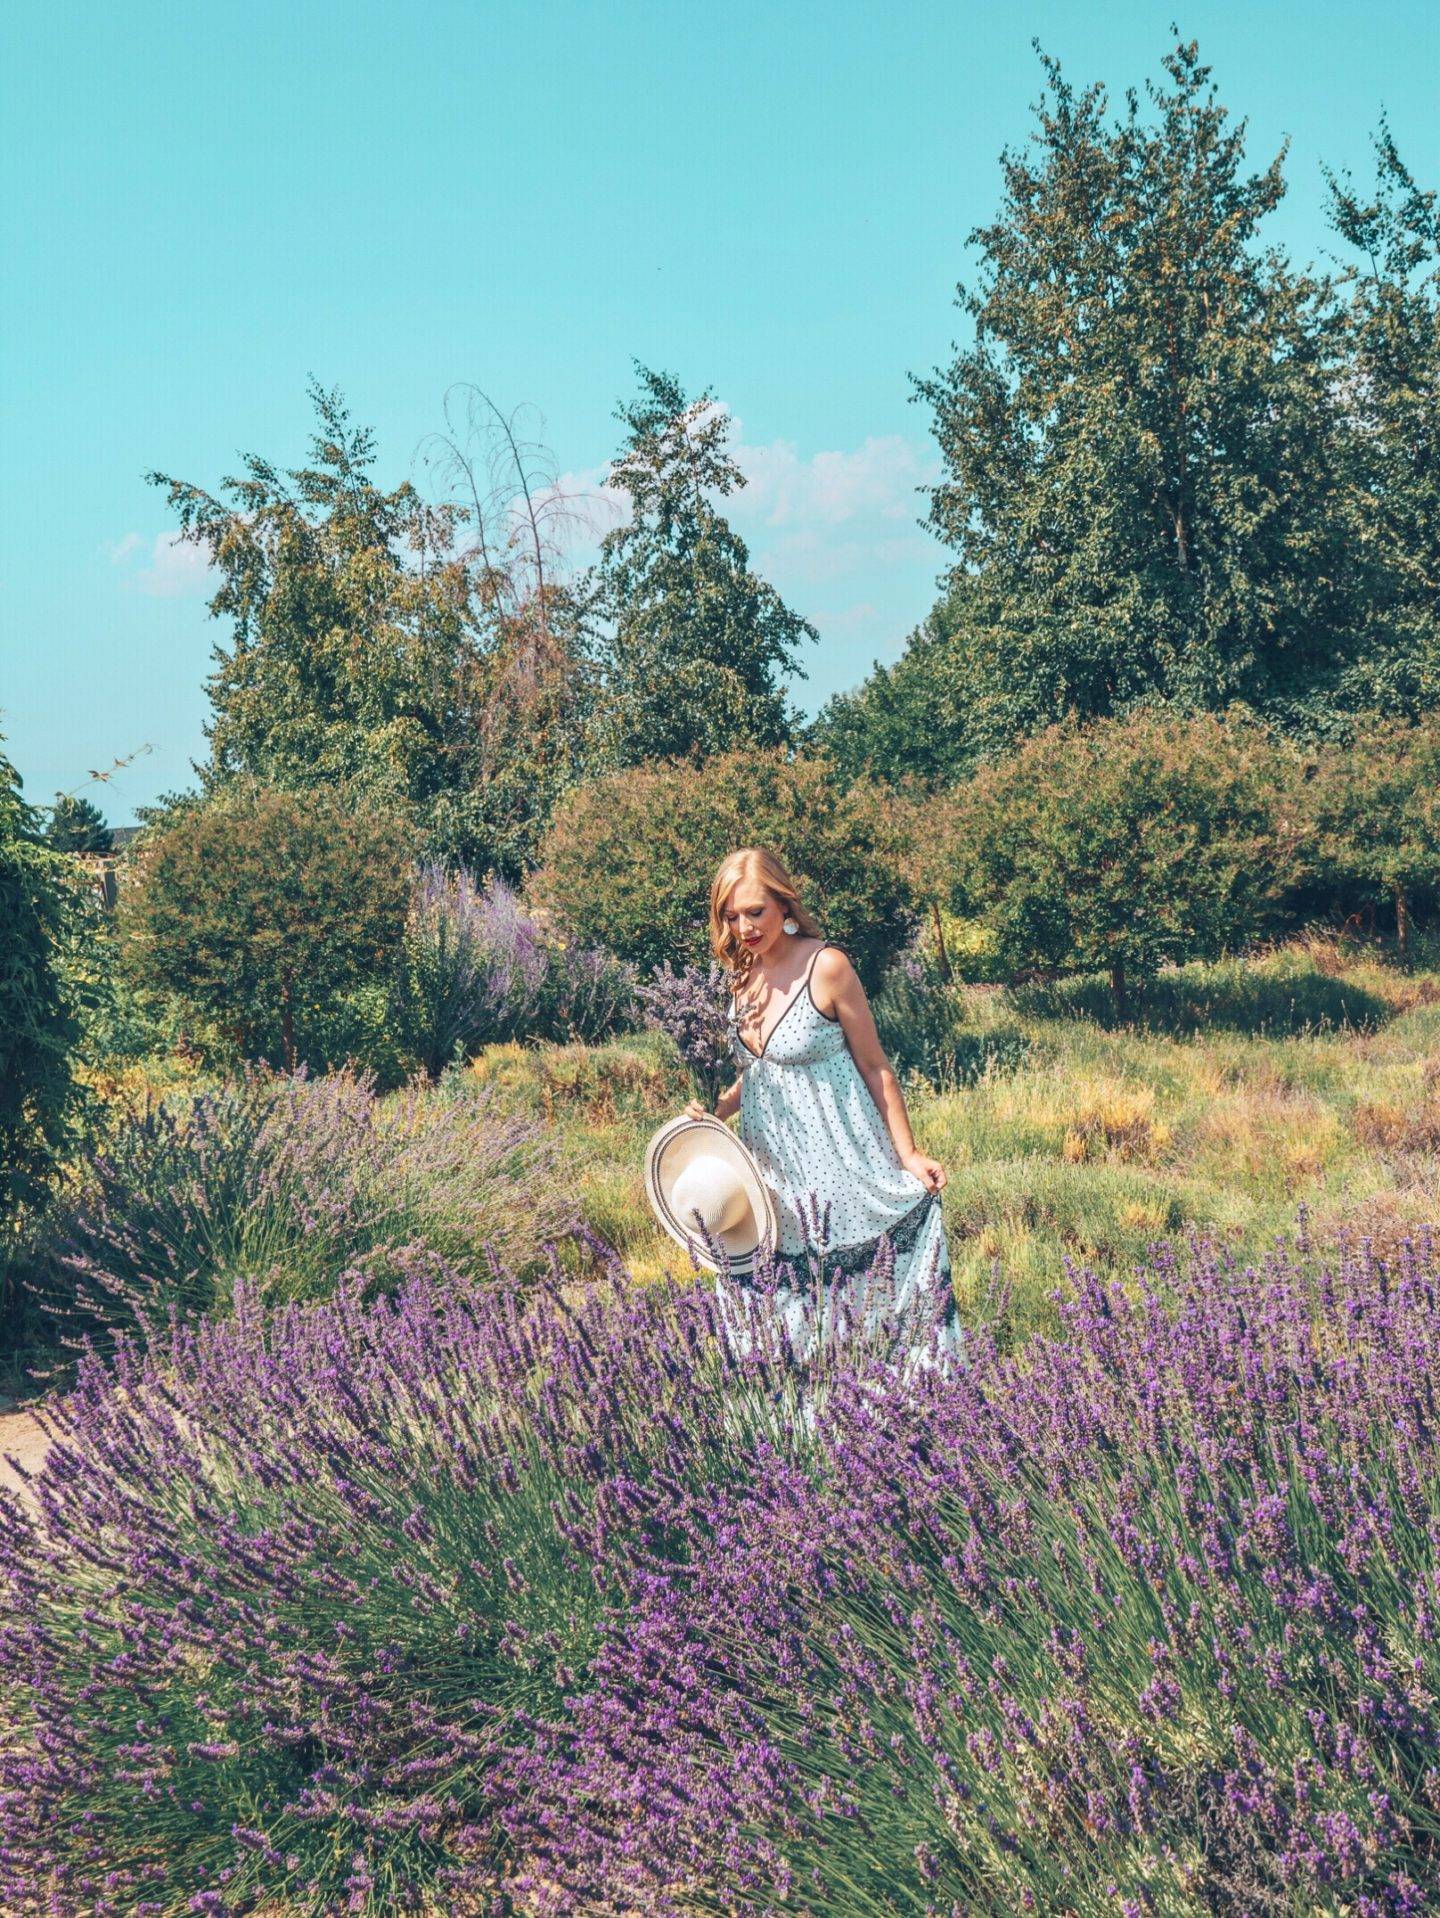 Looking for the most beautiful Instagrammable places in Kelowna? Check out this guide to find the best photography spots in Kelowna! 

Pictured here: The Okanagan Lavender and Herb Farm